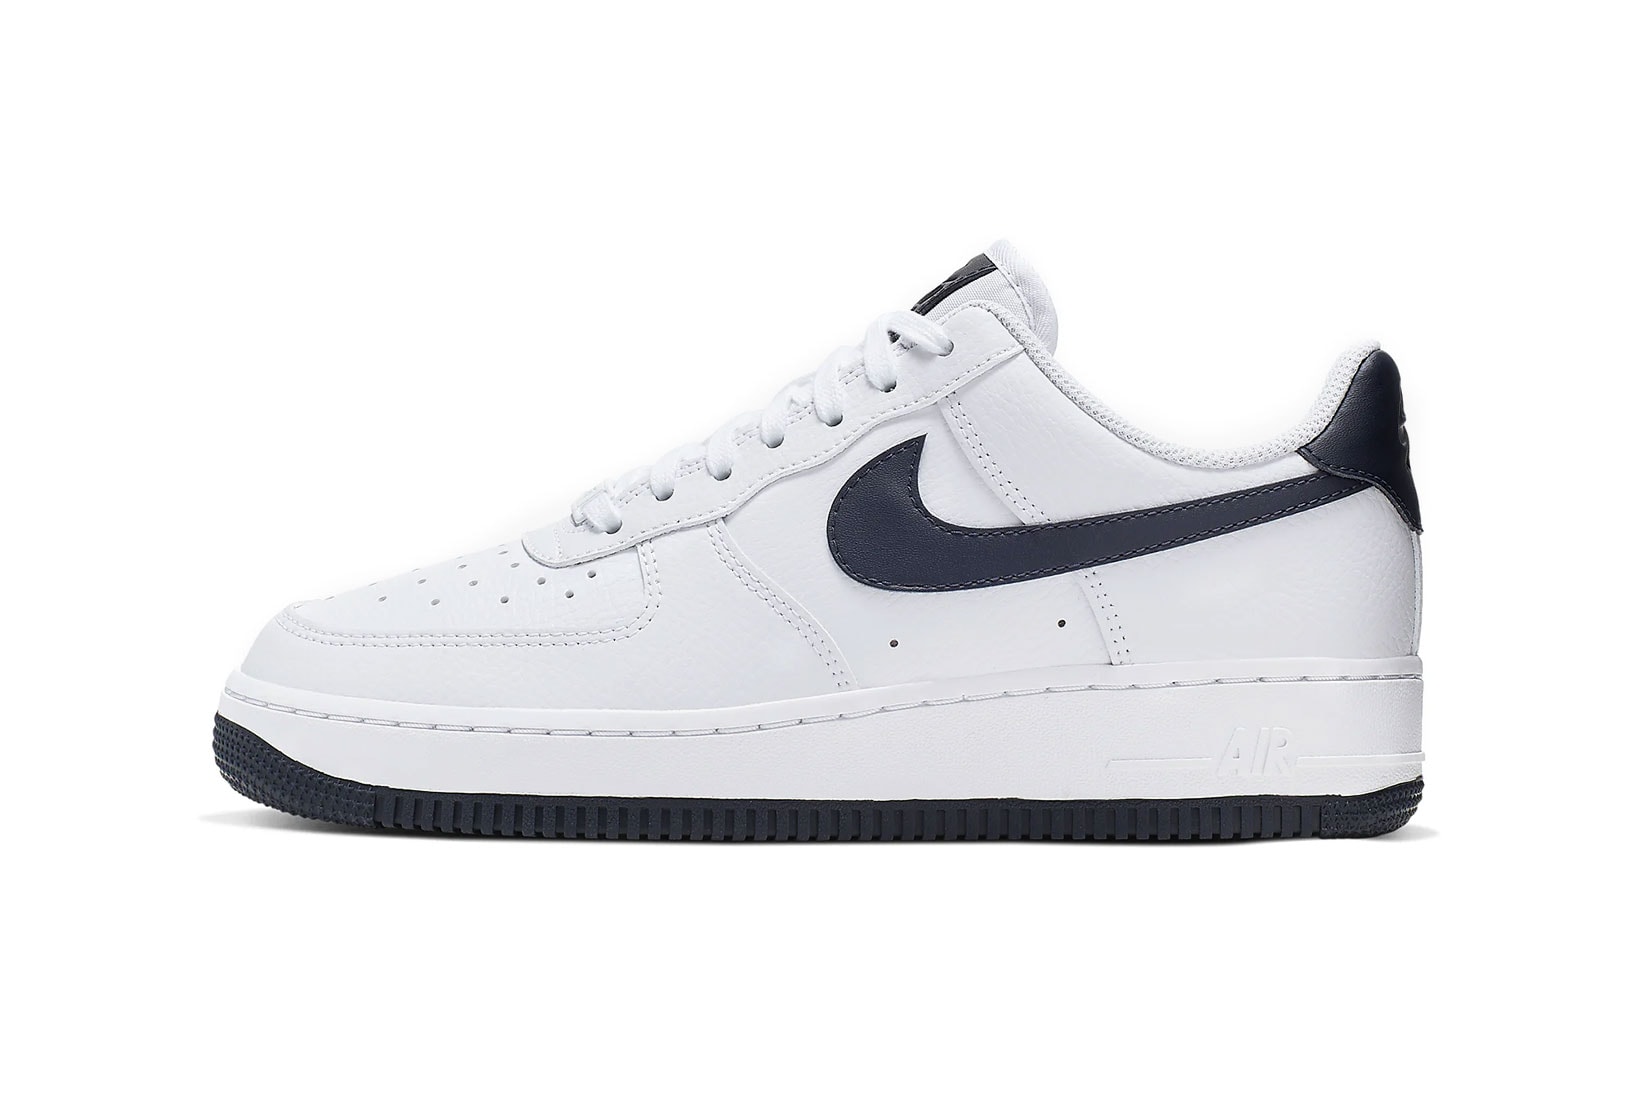 Nike Air Force 1 '07 LV8 sneakers in navy and brown